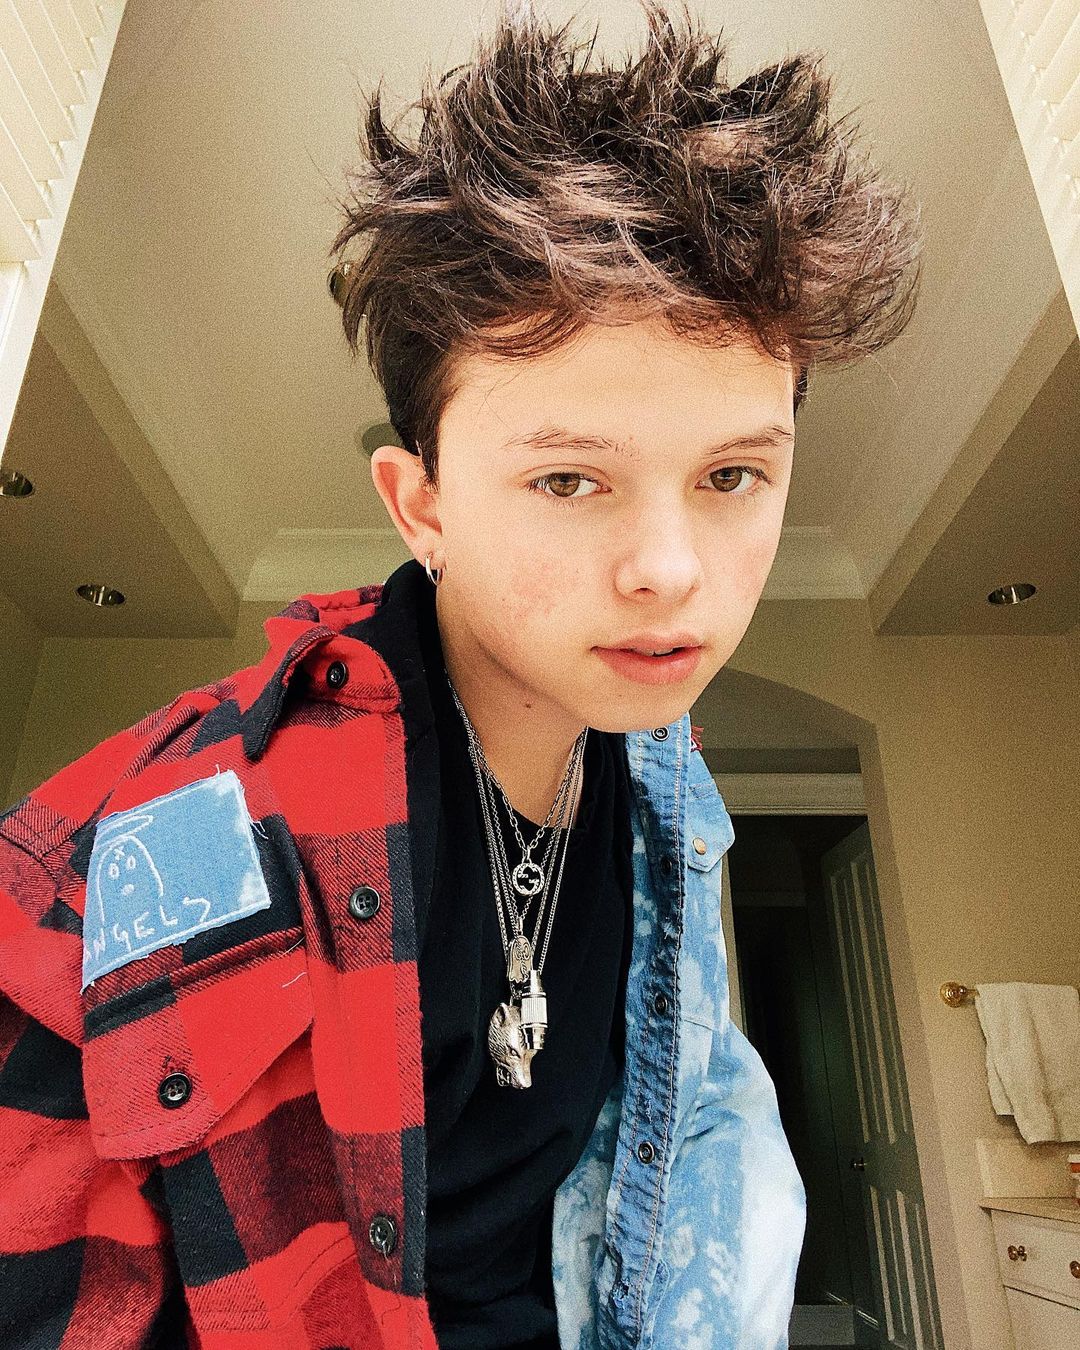 45 Jacob Sartorius Facts About This Famous Internet Star | Facts.net